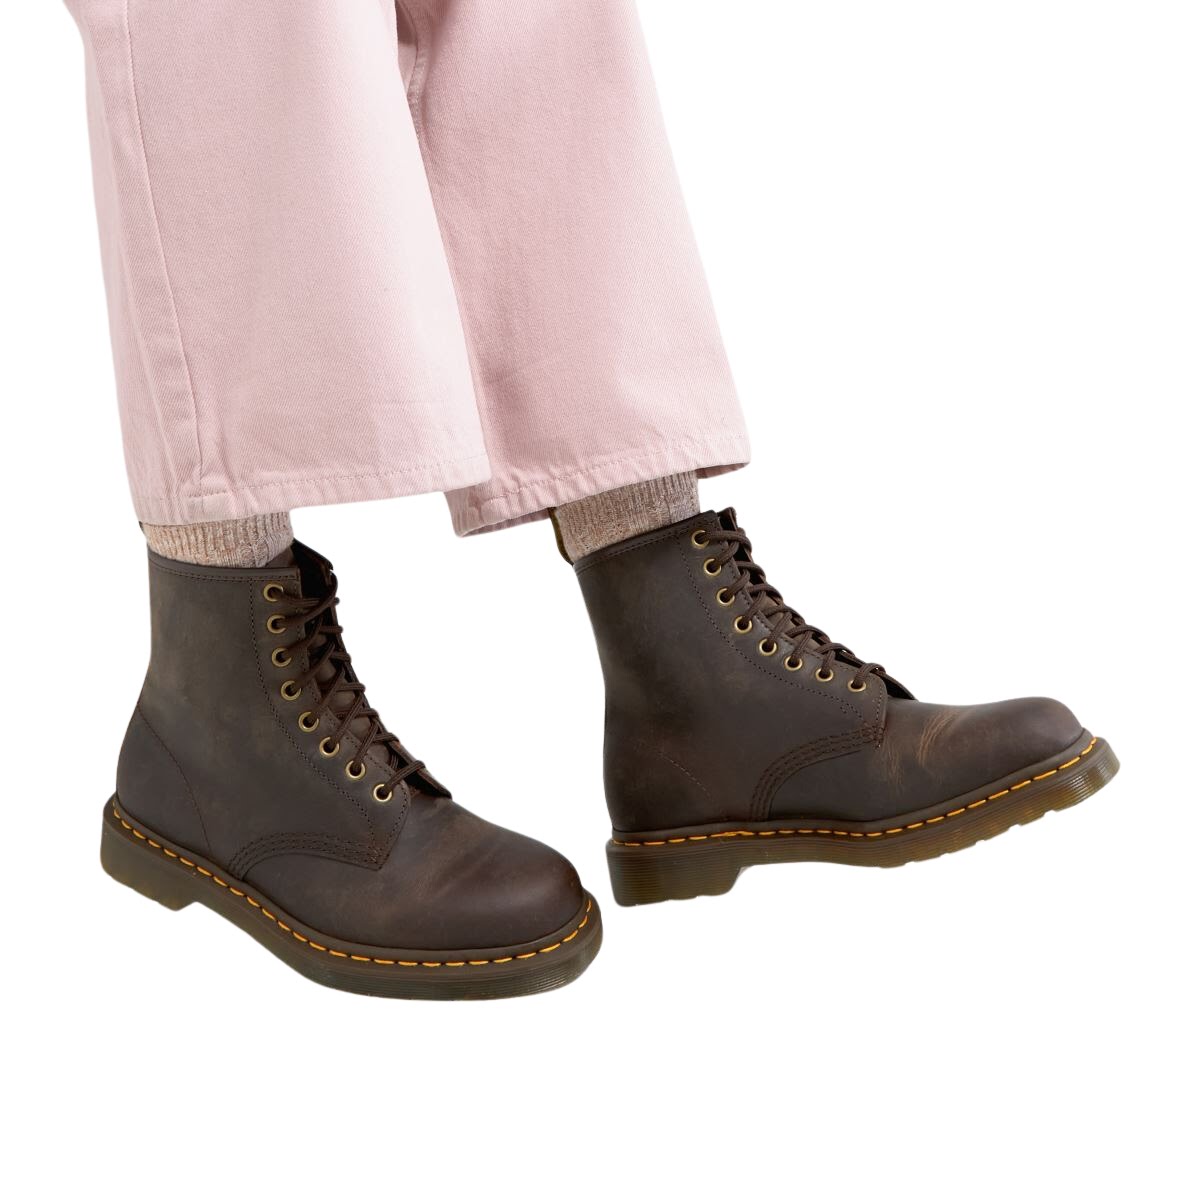 Dr Martens 1460 Boots in Brown, €154.95, Schuh